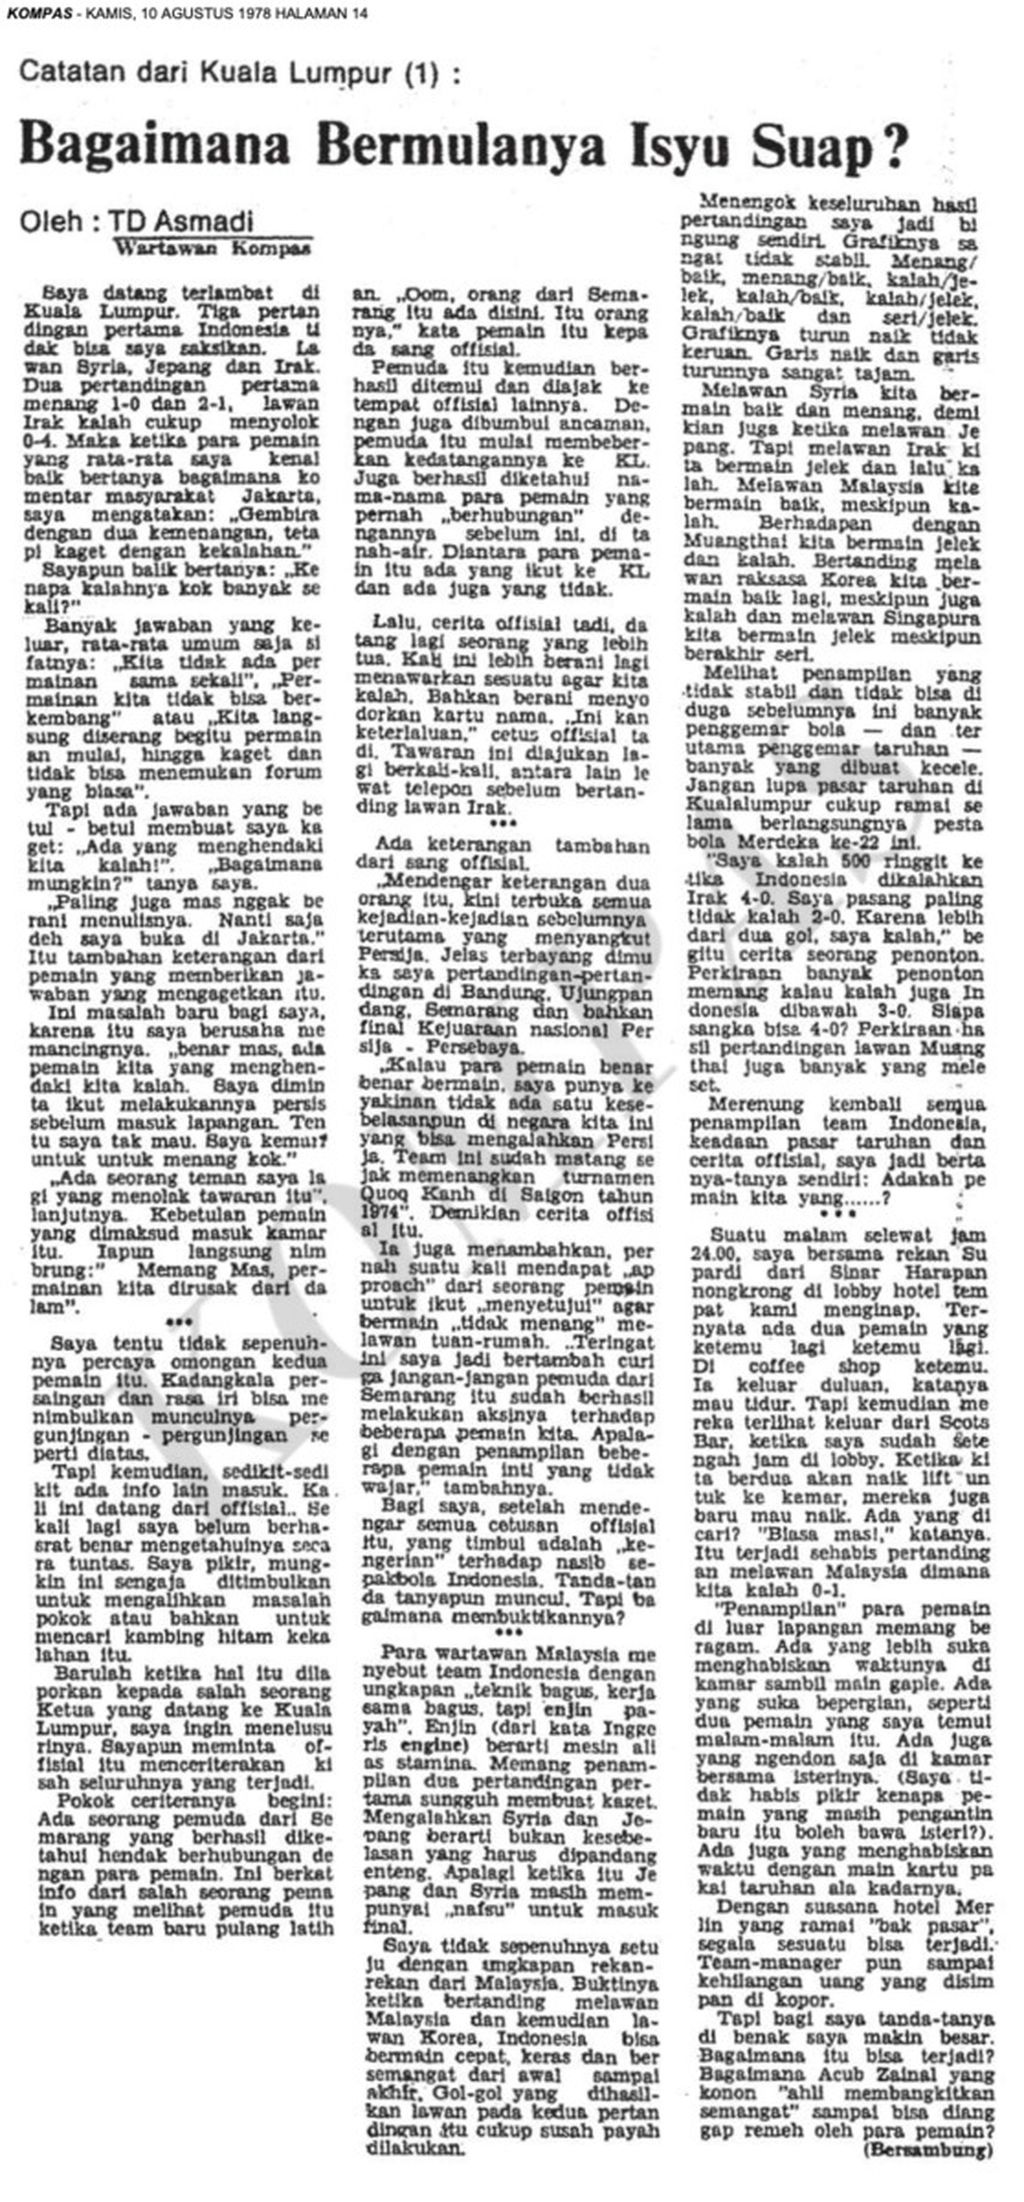 <i>Kompas</i> news about the alleged bribery case that emerged during Indonesia's defeat to Iraq at the 1978 Merdeka Games.